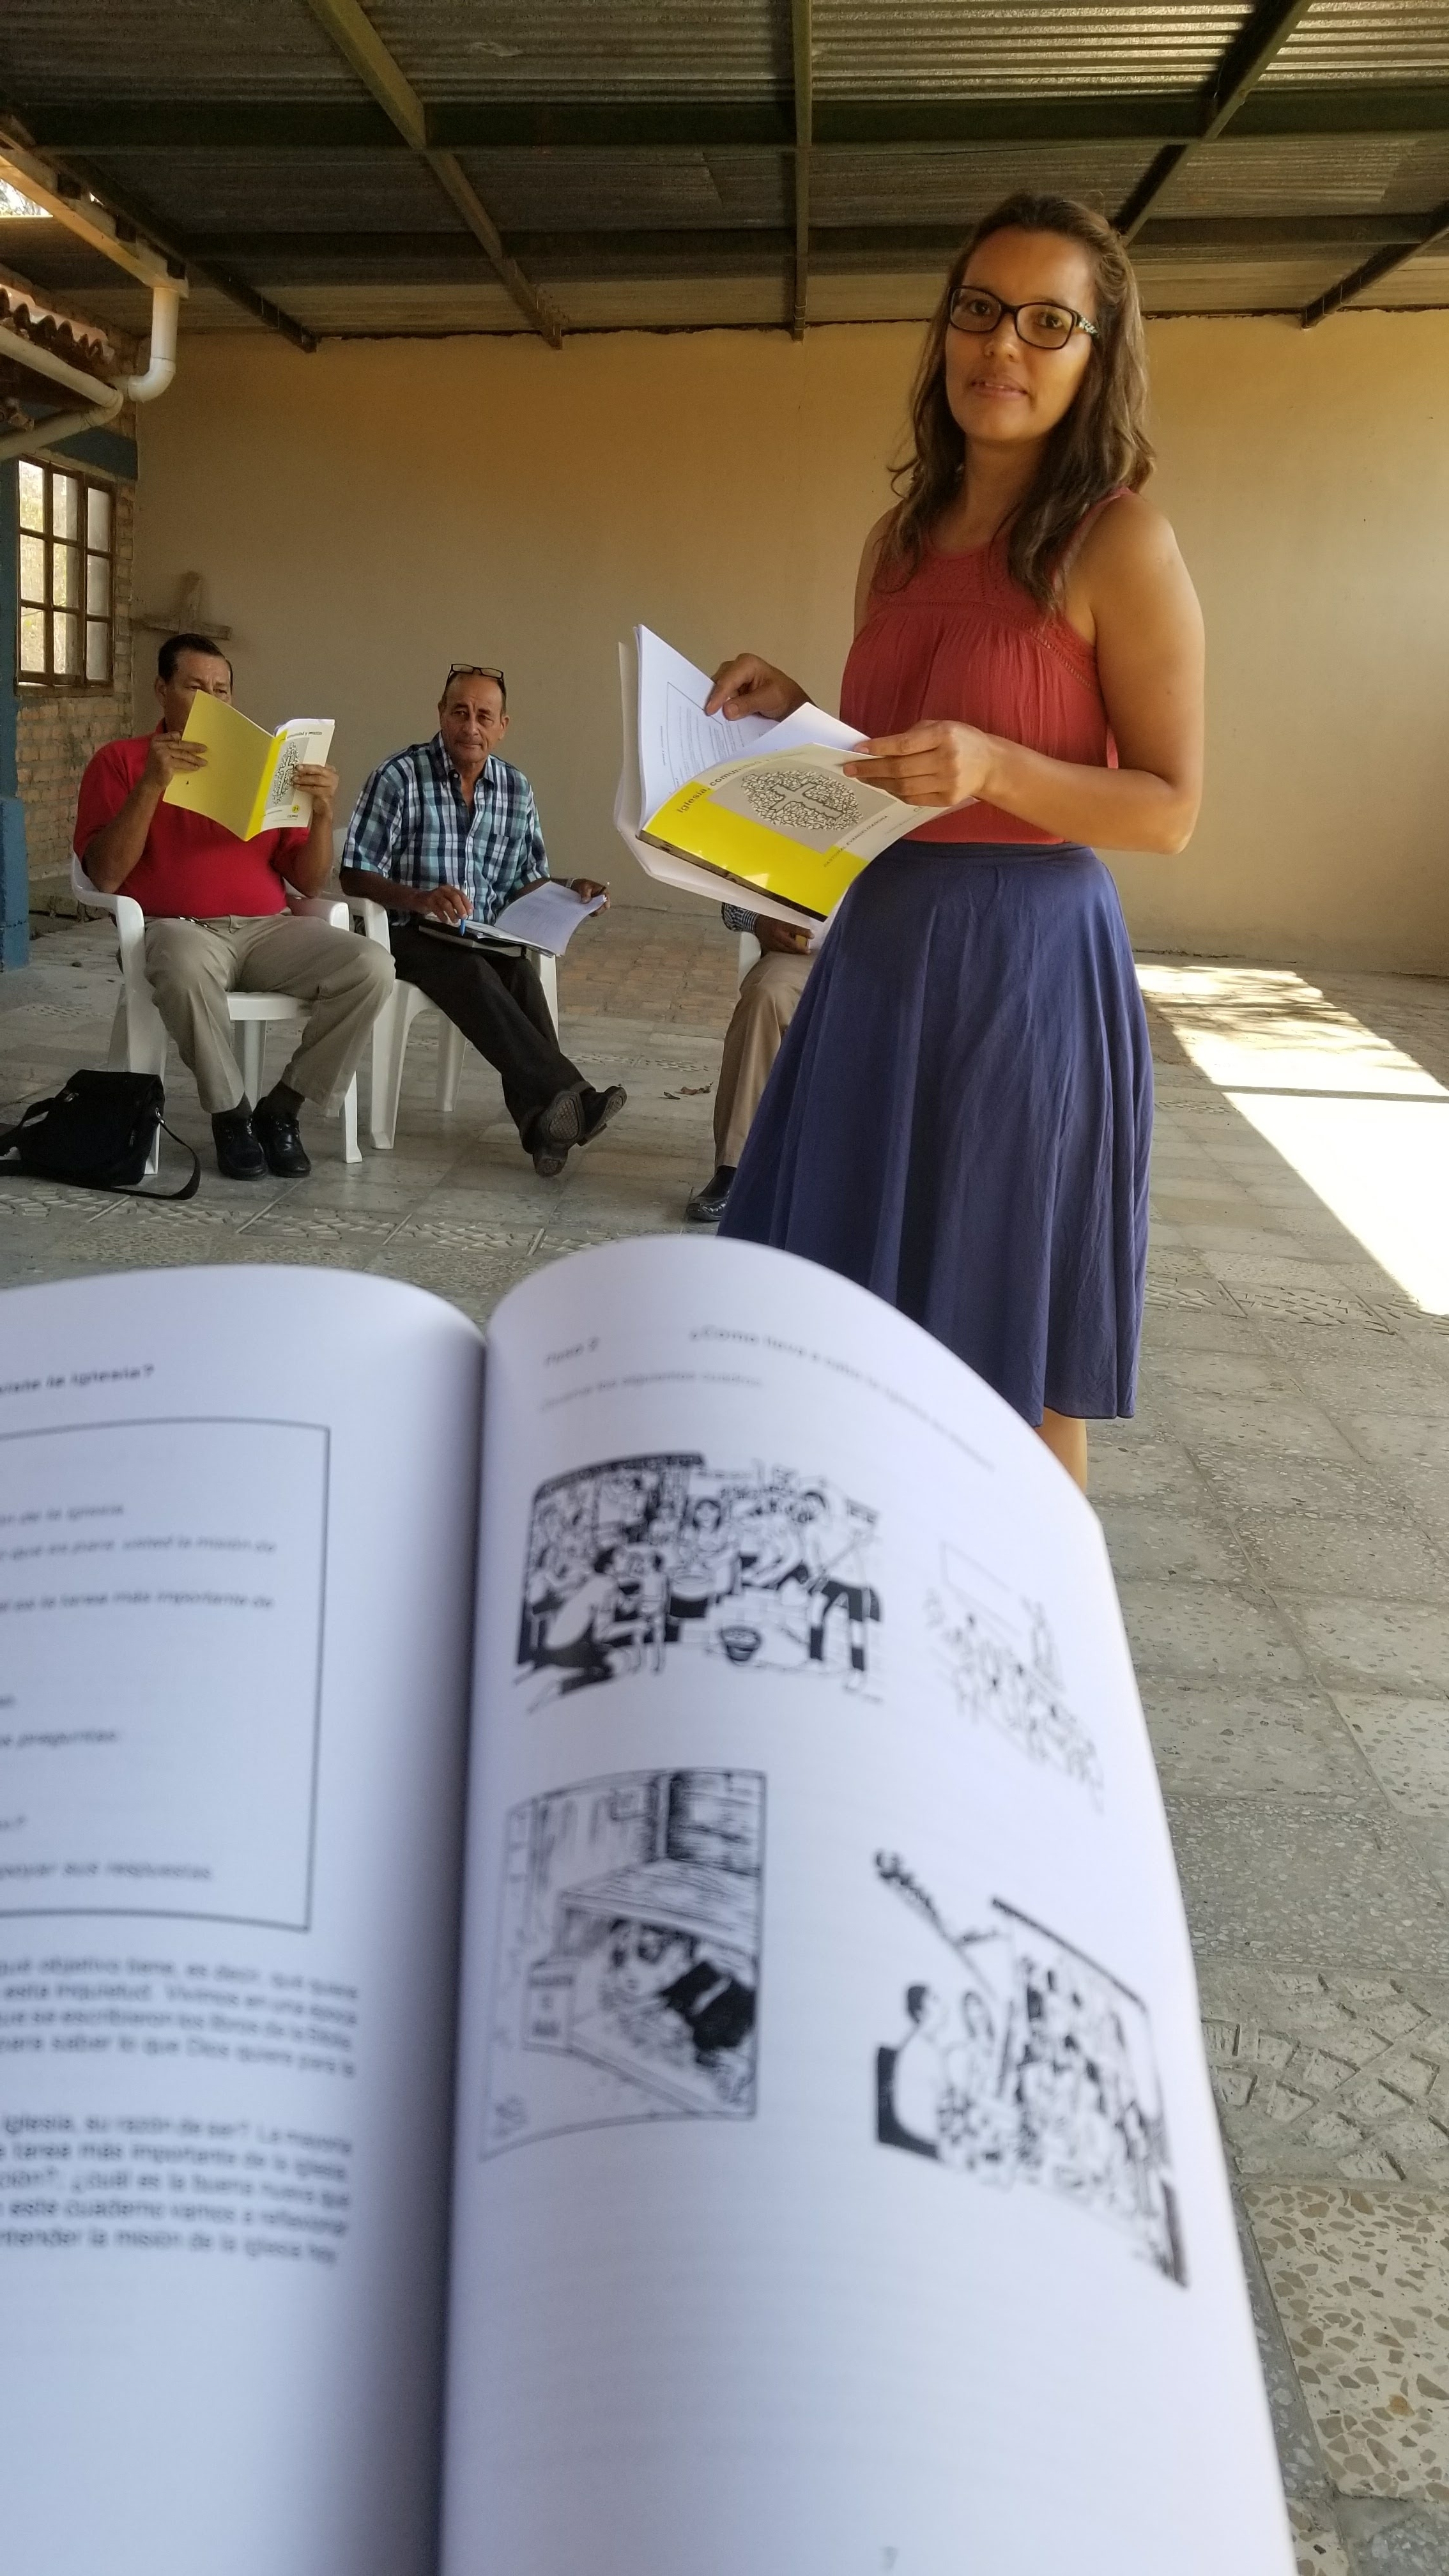 Betzabé Reyes teaches a class on “Church, Community and Mission,” a program of the Biblical Pastoral Institute of the Latin American Biblical University. The class took place in the former parking lot of the Villa Gracia retreat center in Tegucigalpa